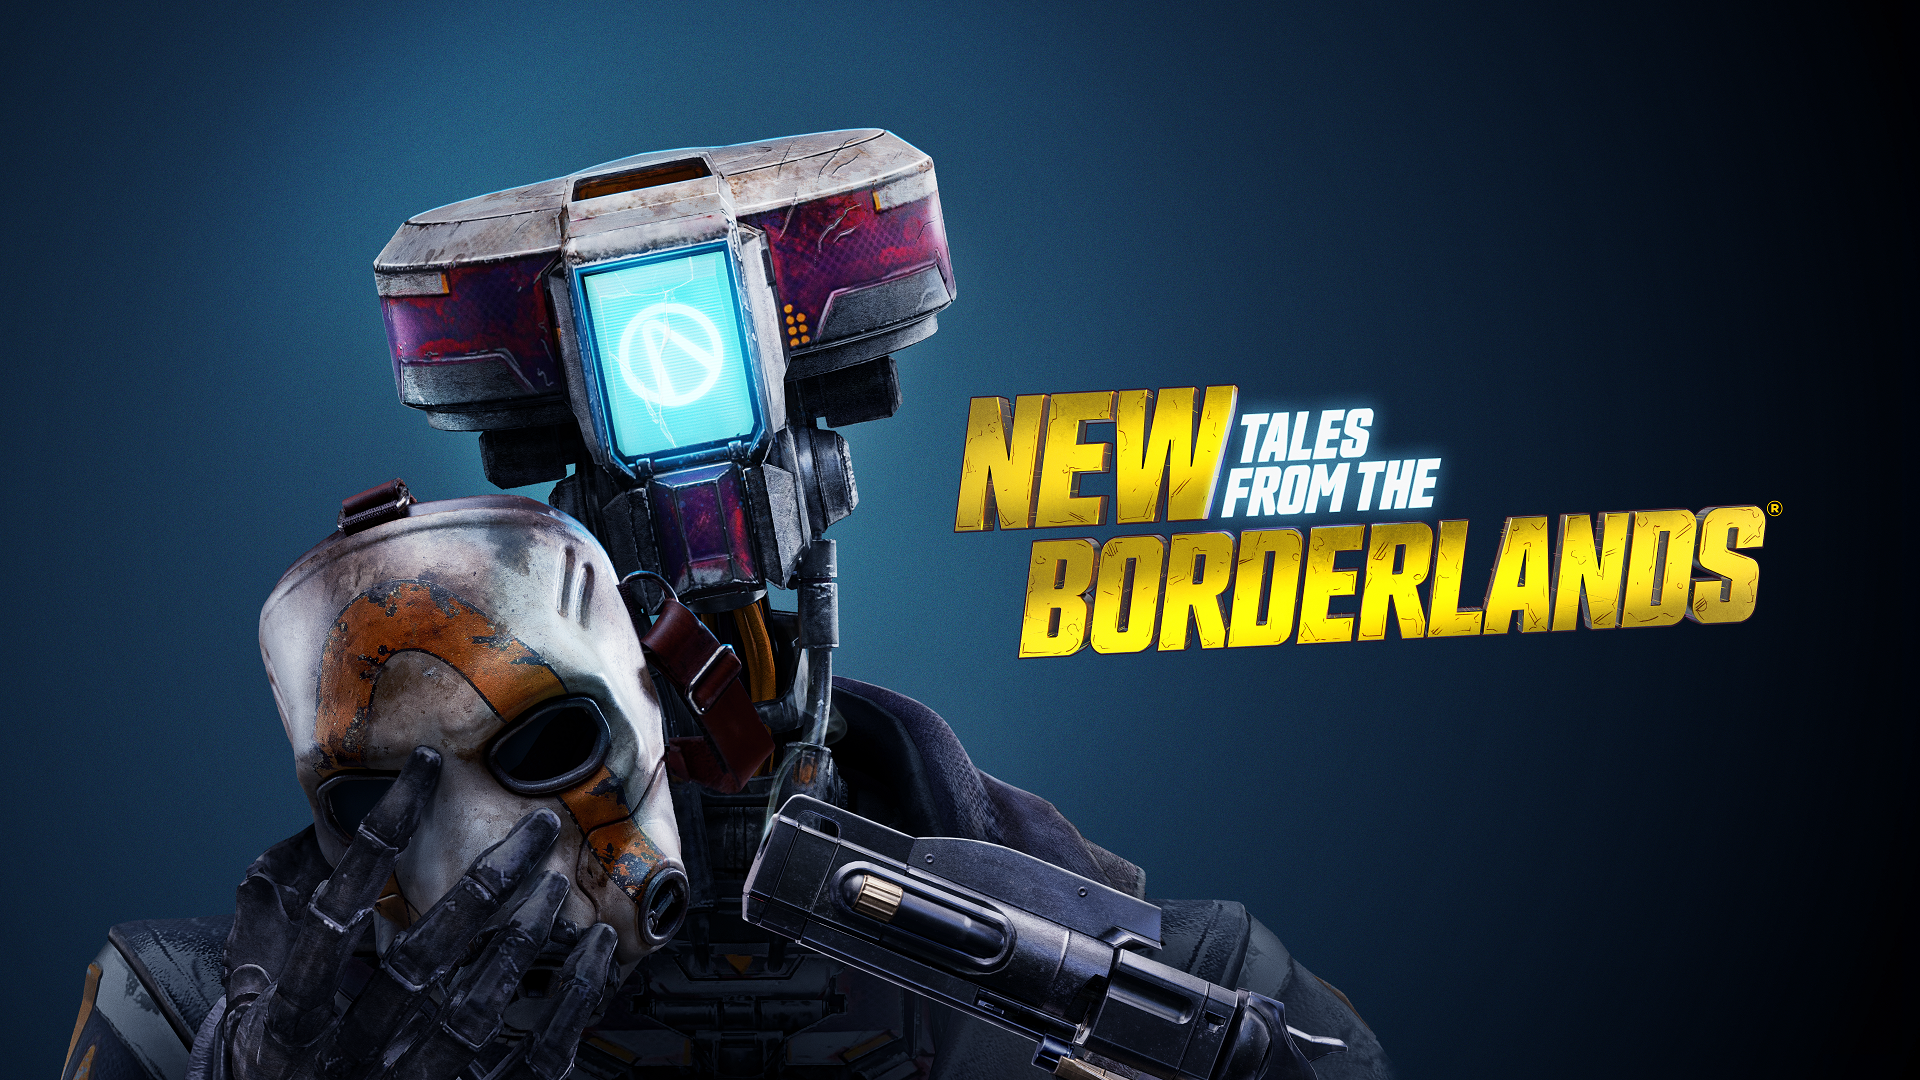 Key art for New Tales from the Borderlands